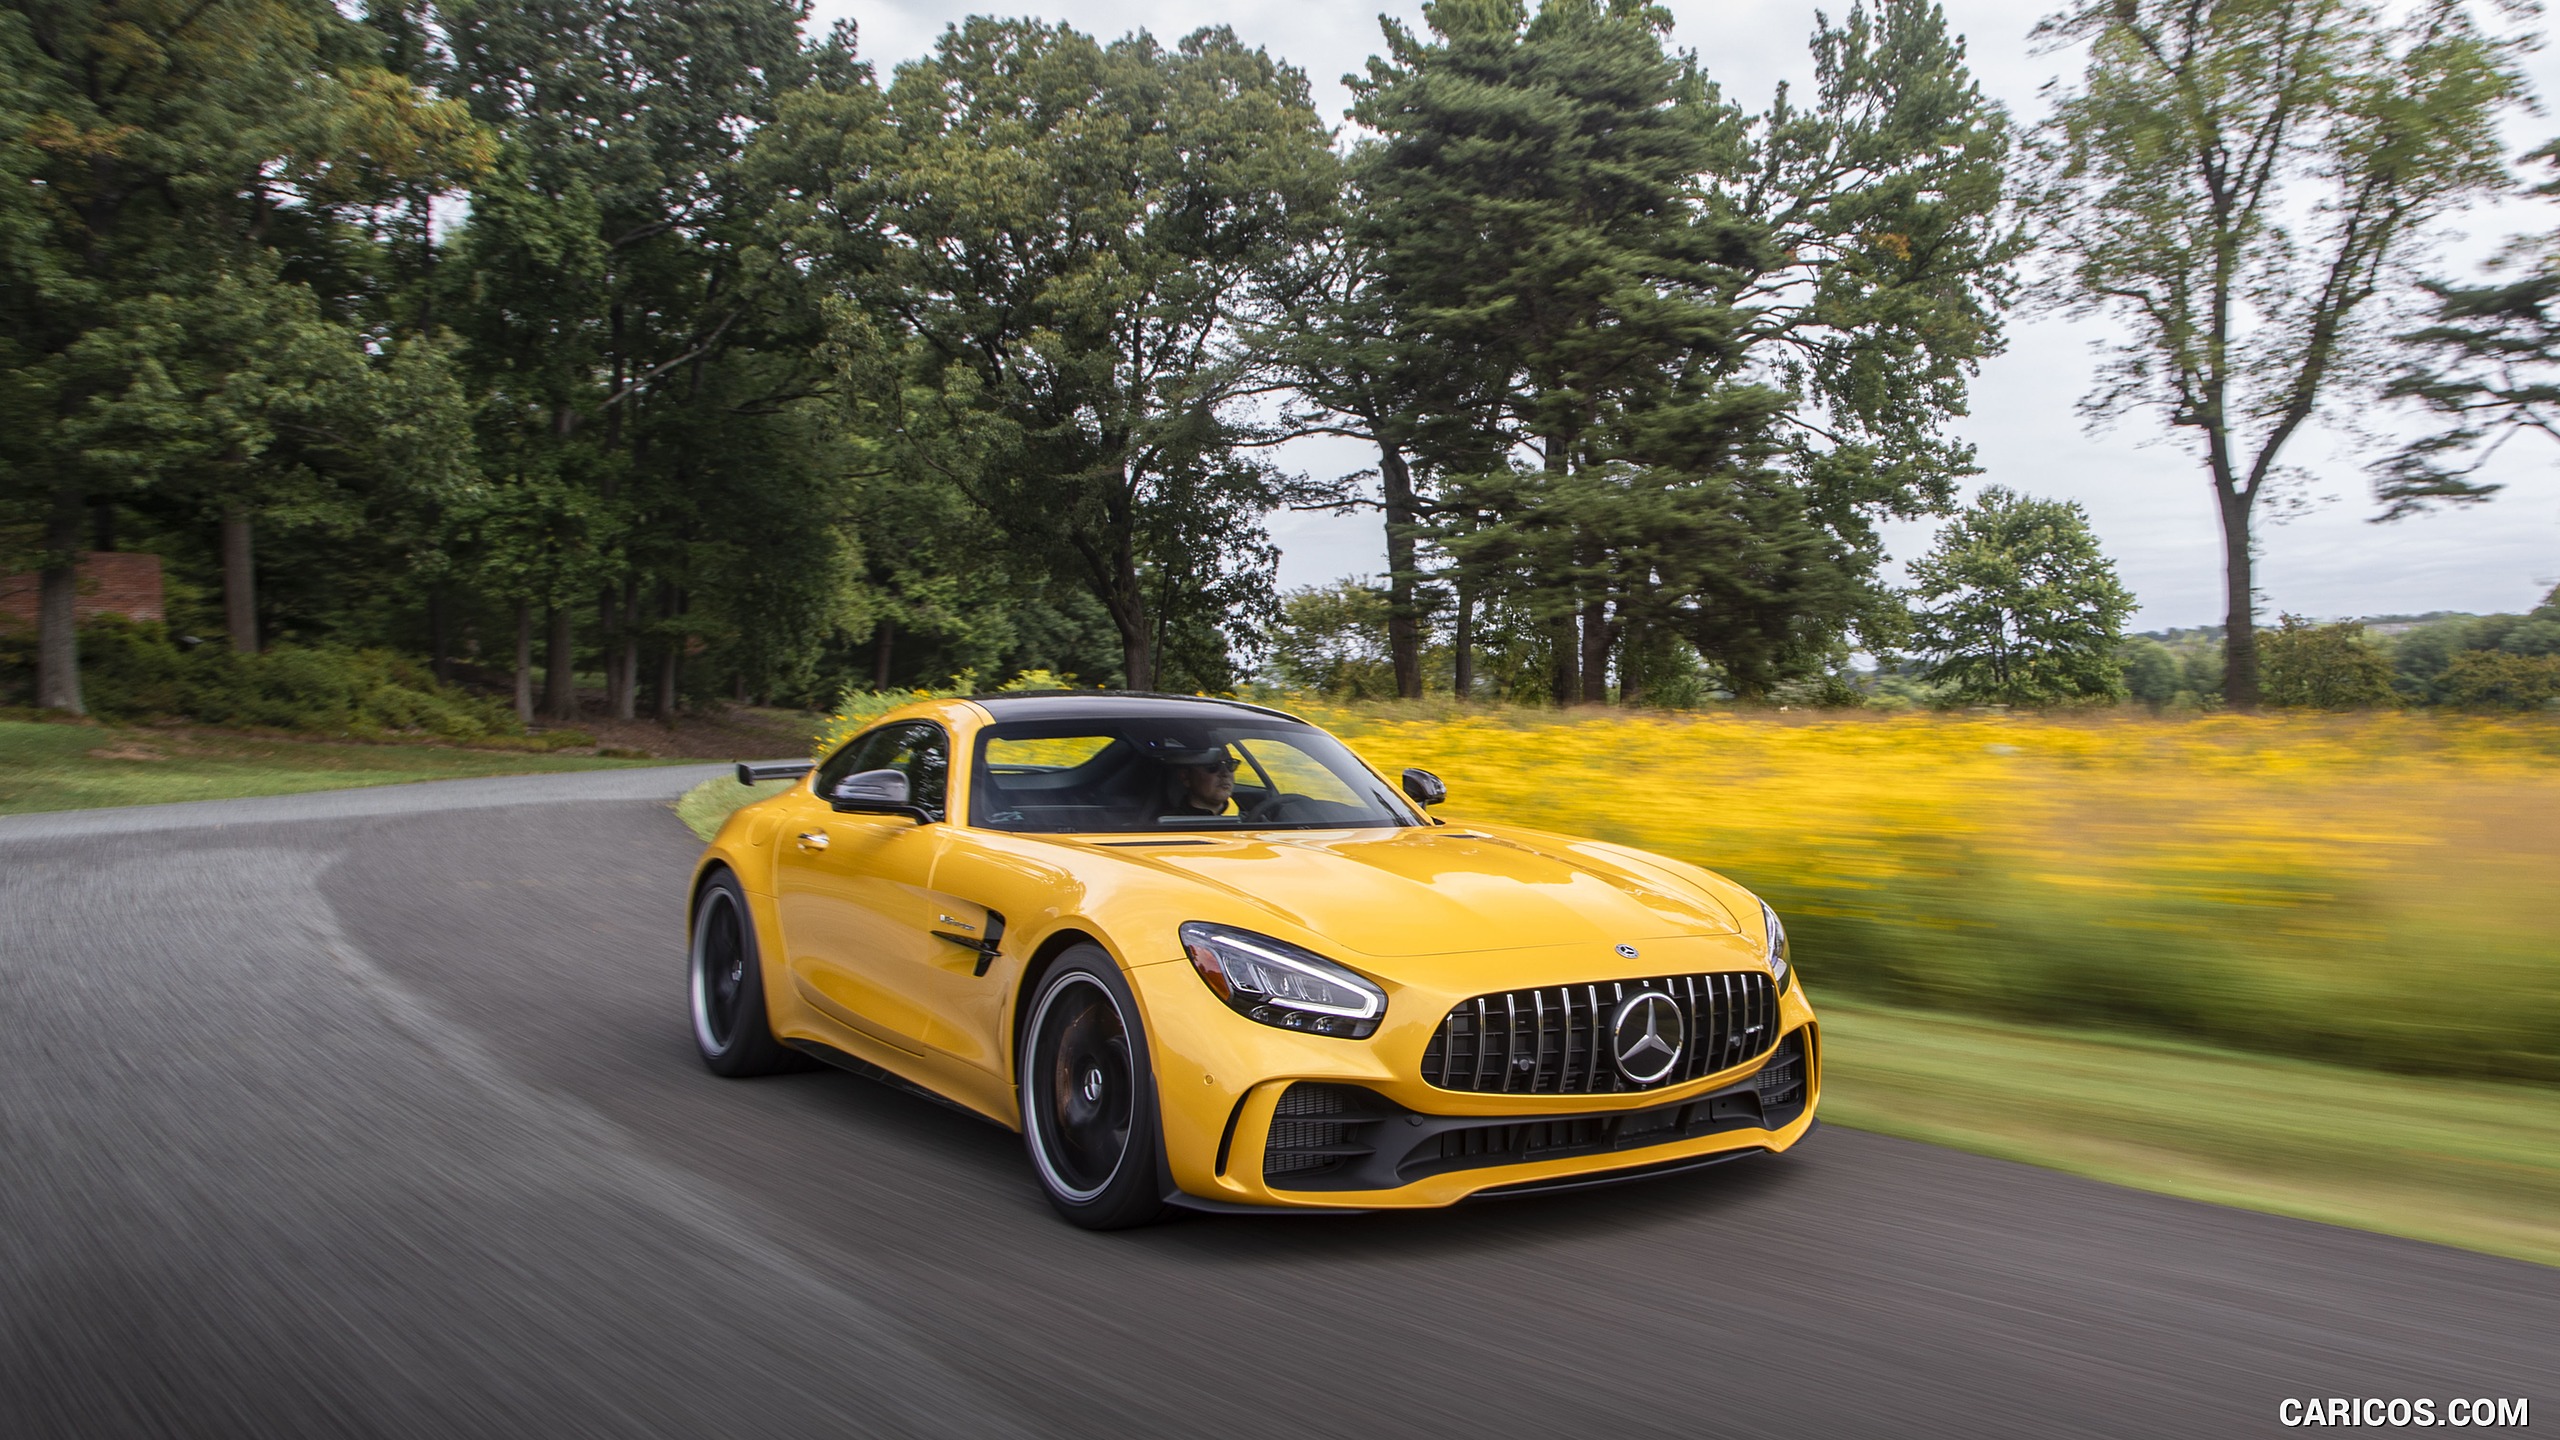 2020 Mercedes-AMG GT R Coupe (US-Spec) - Front Three-Quarter, #245 of 328